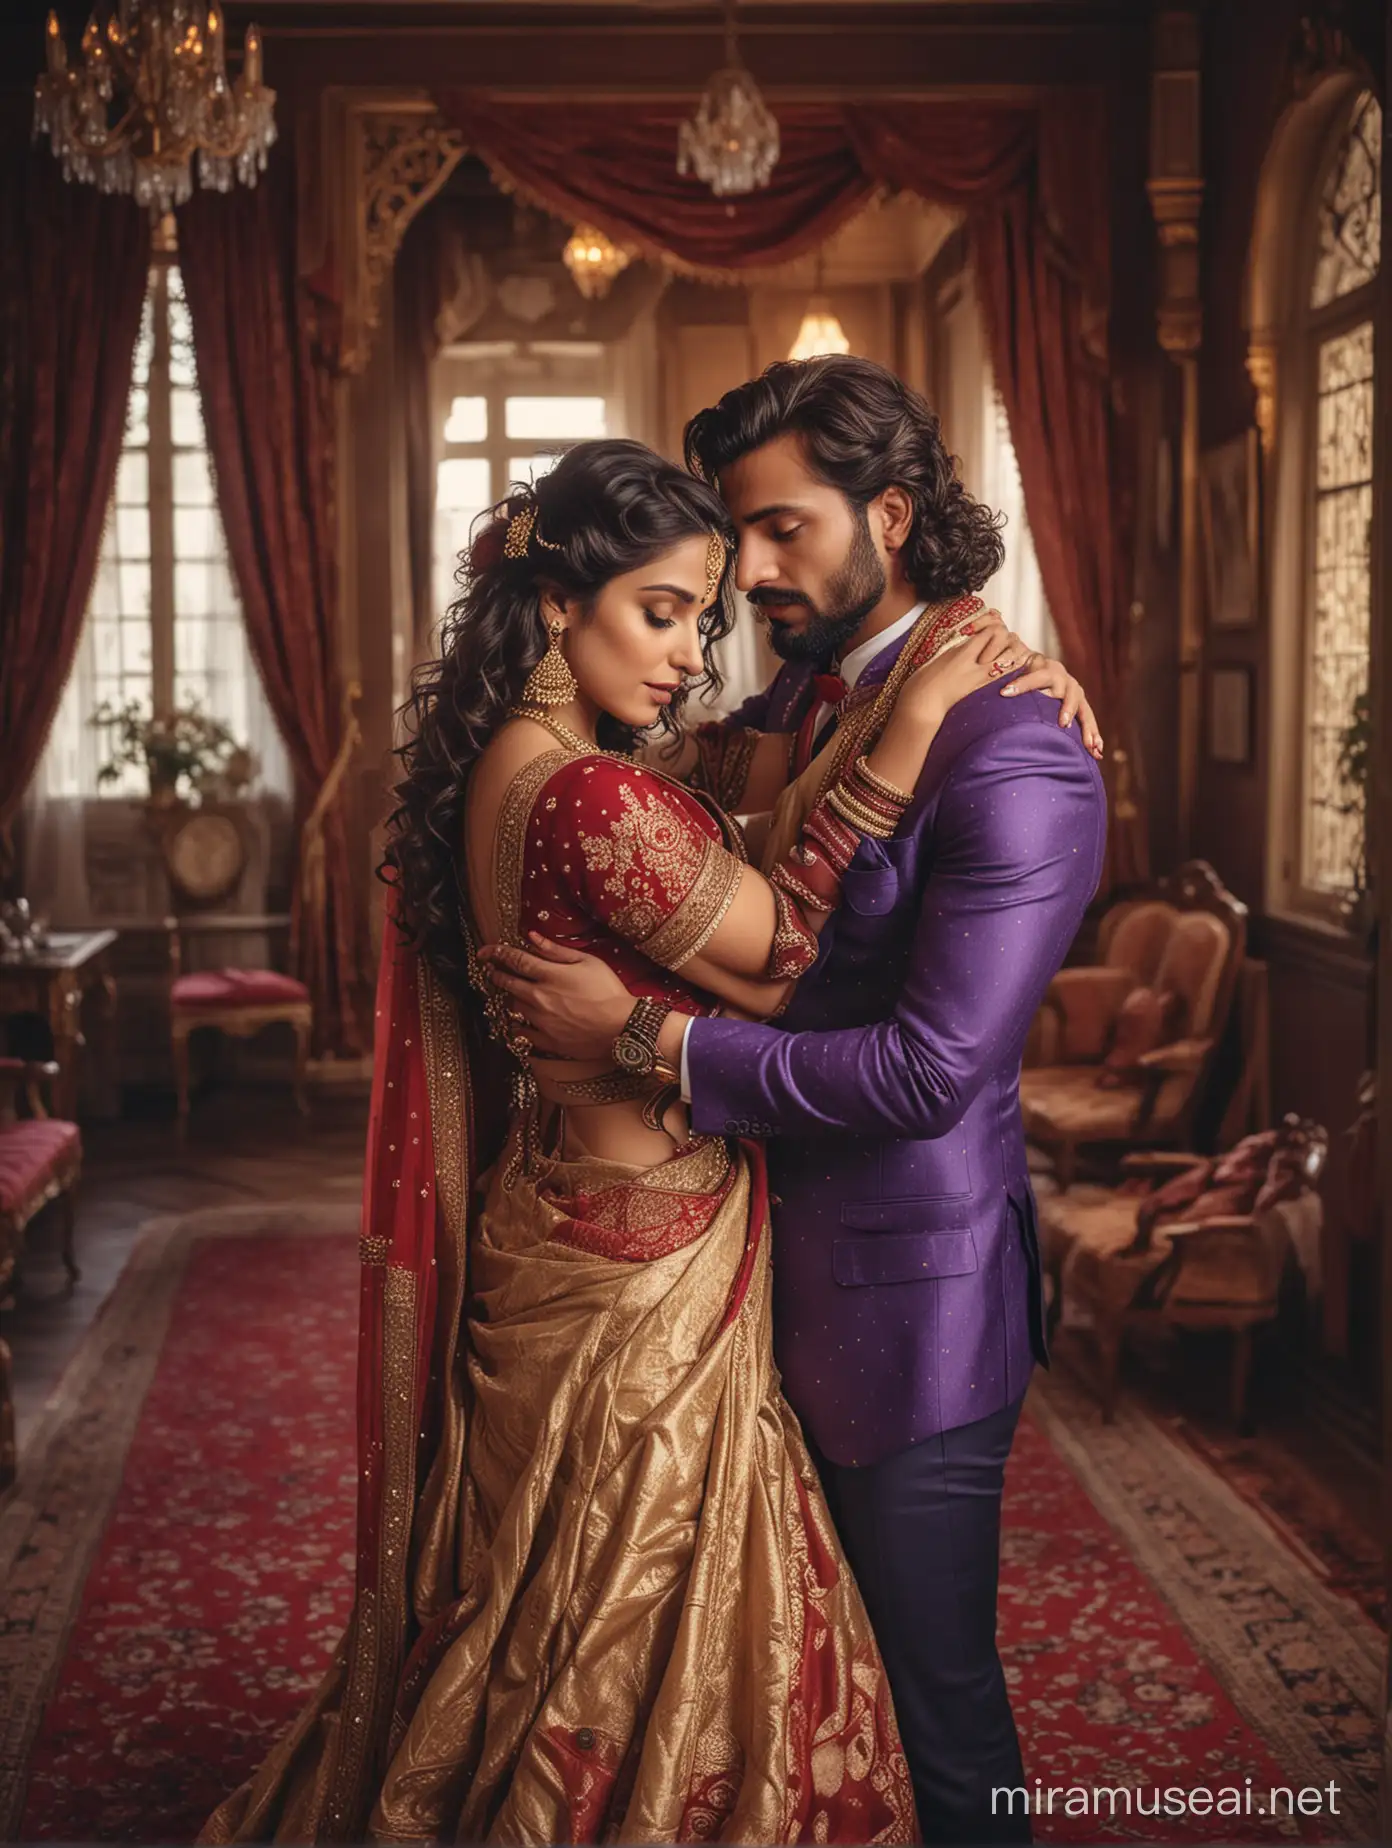 full body view portrait photo of most beautiful european couple as most beautiful indian couple, 28 mm lens, waist shot, most beautiful cute girl in elegant saree, bold color, wide black eyes, full face, girl has long curly hair falling on breasts, full makeup, bridal makeup, perfect red dot on forehead, full jewelry, hair ornaments, antique gold necklace, blouse low cut, girl embracing man and resting forehead on chest of man with deep emotion and ecstasy, man comforting girl with hands around her, man with stylish beard and perfect hair cut, suit and tie, photo realistic,
background, vintage lamps, dimly  lit palace interior ambiance, purple color carpet, interior designs, big window for outside view, romantic atmosphere, intricate details, 8k.